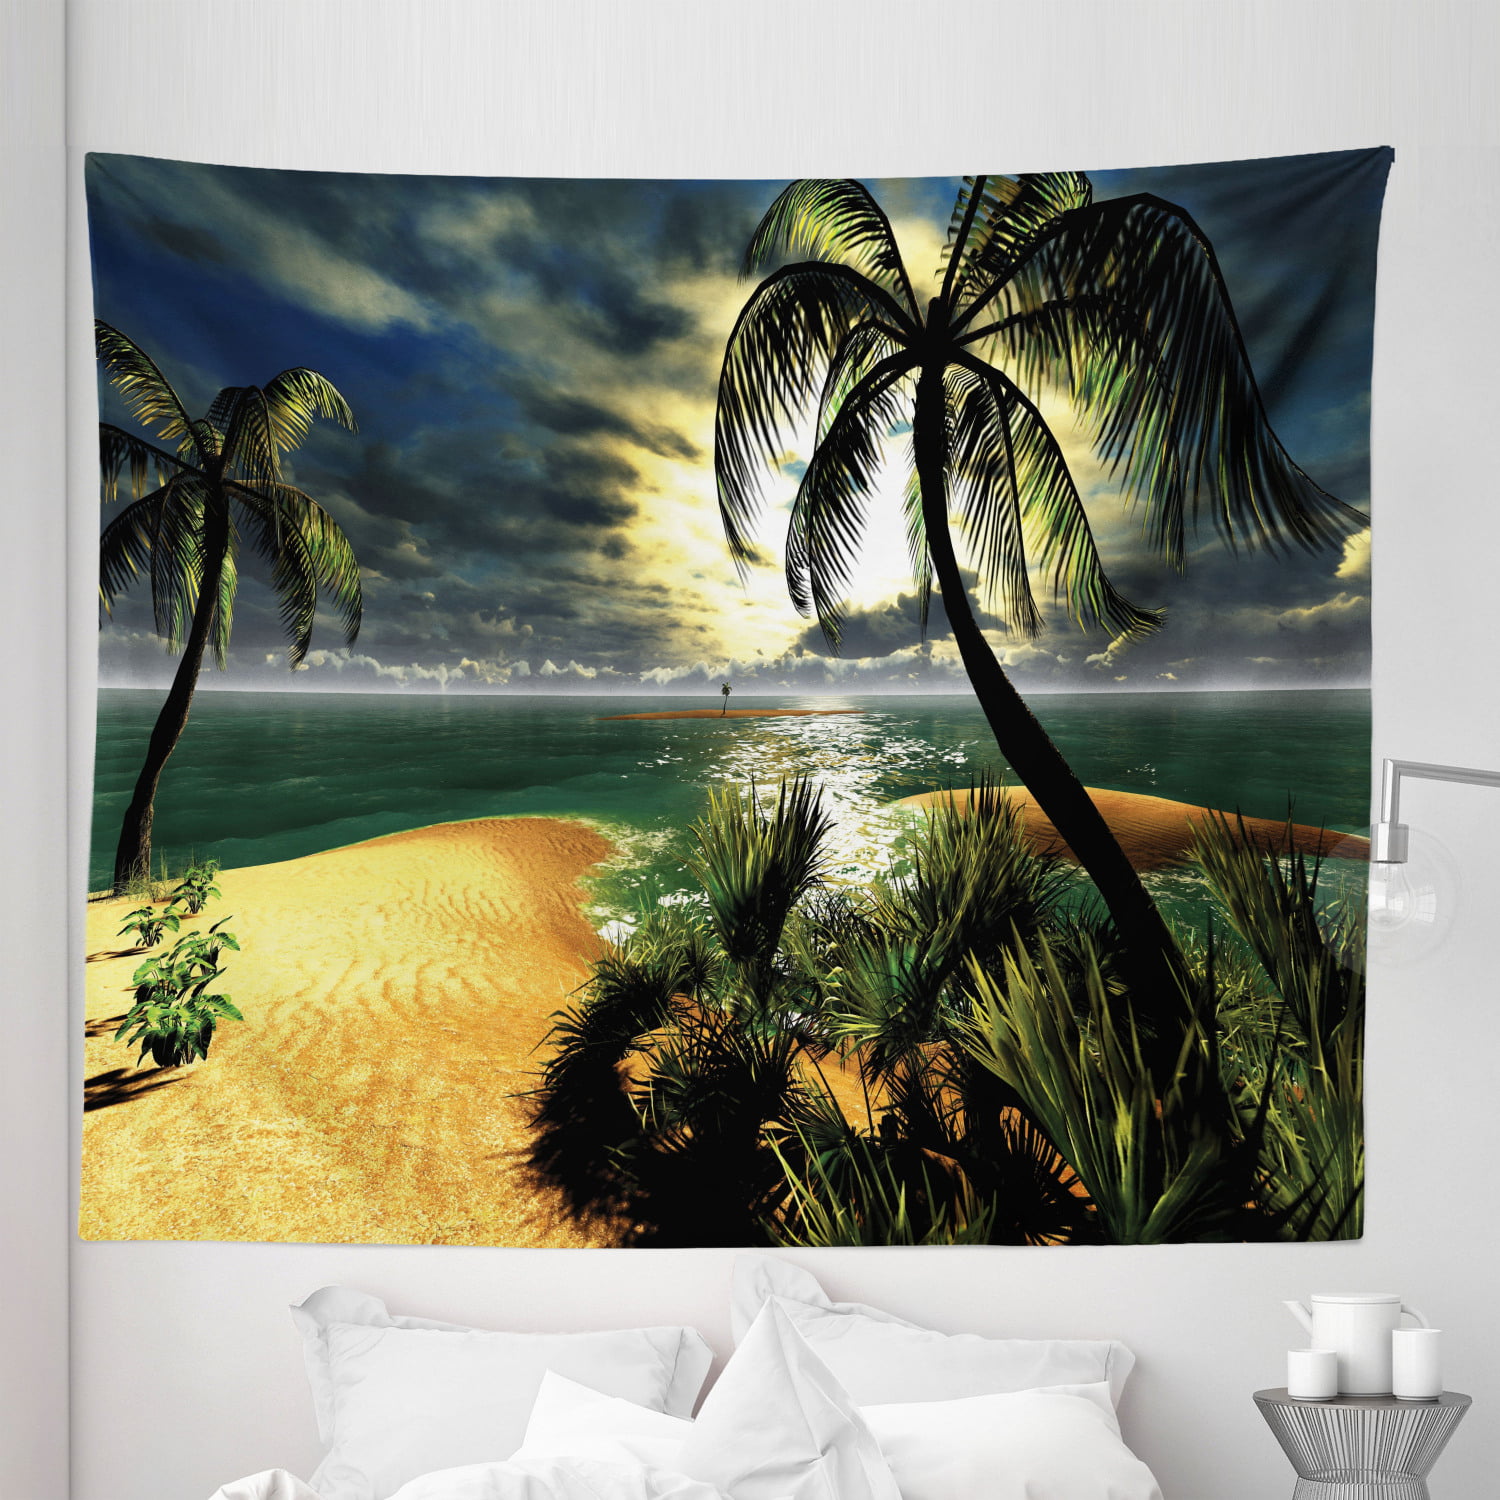 Sun Beach Palm Trees Polyester FabricTapestry Wall Hanging Mural Decor Blanket 